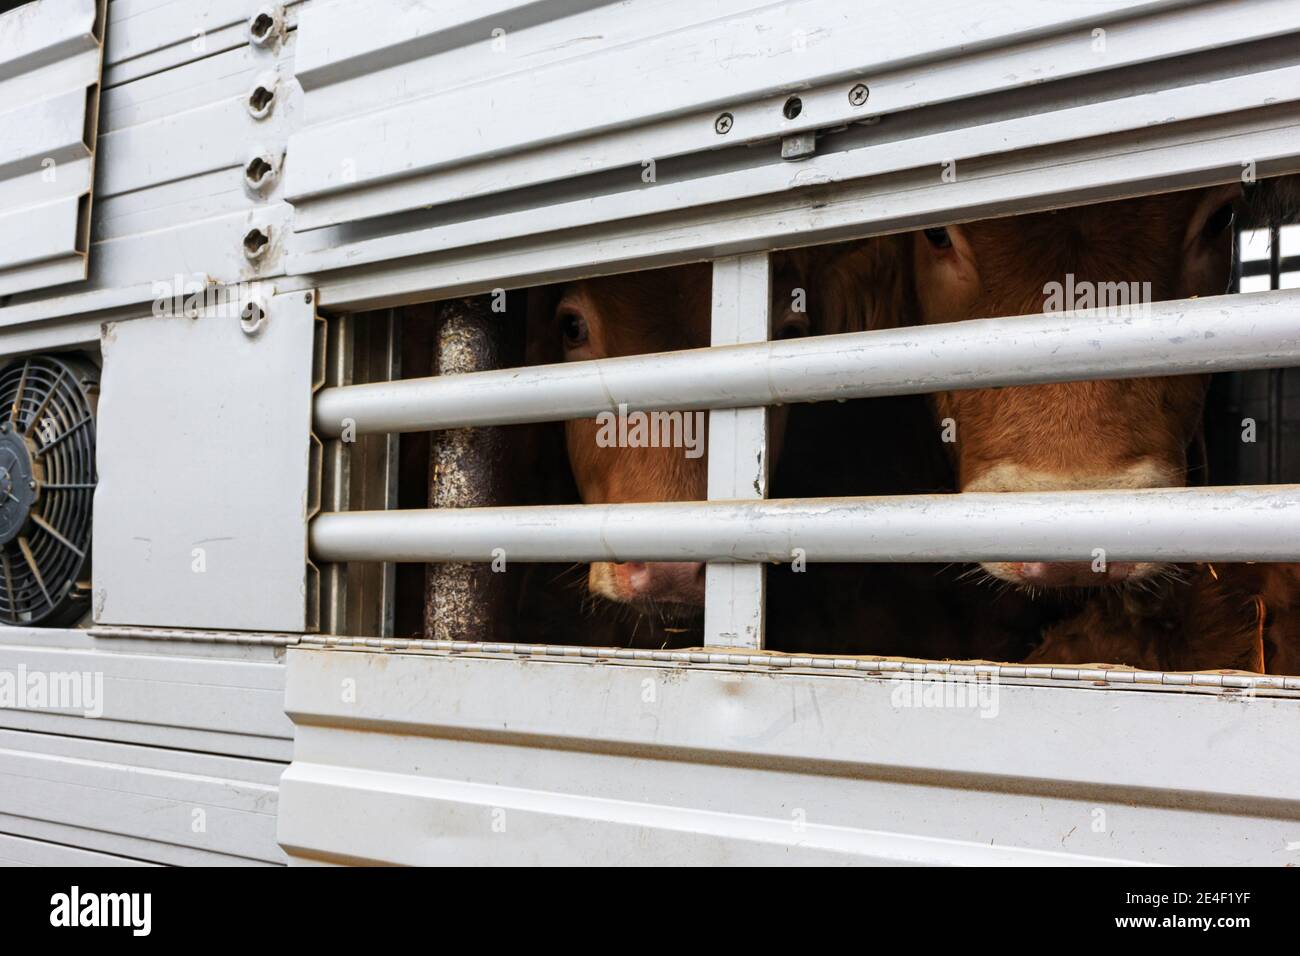 Veal peeking out of aeration windows in a cattle truck. Stock Photo